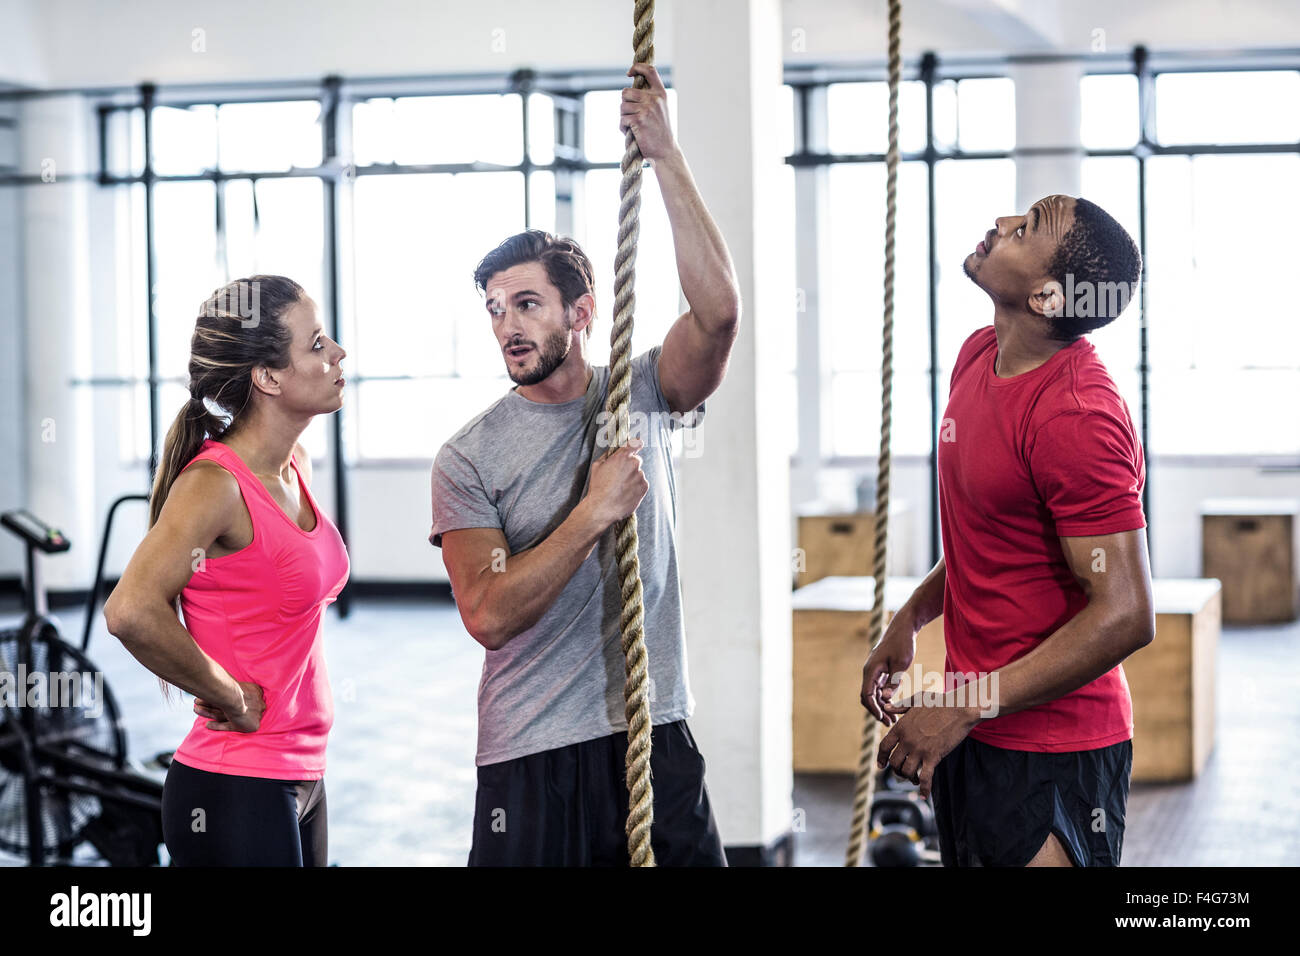 Man with trainers climbing ropes Stock Photo